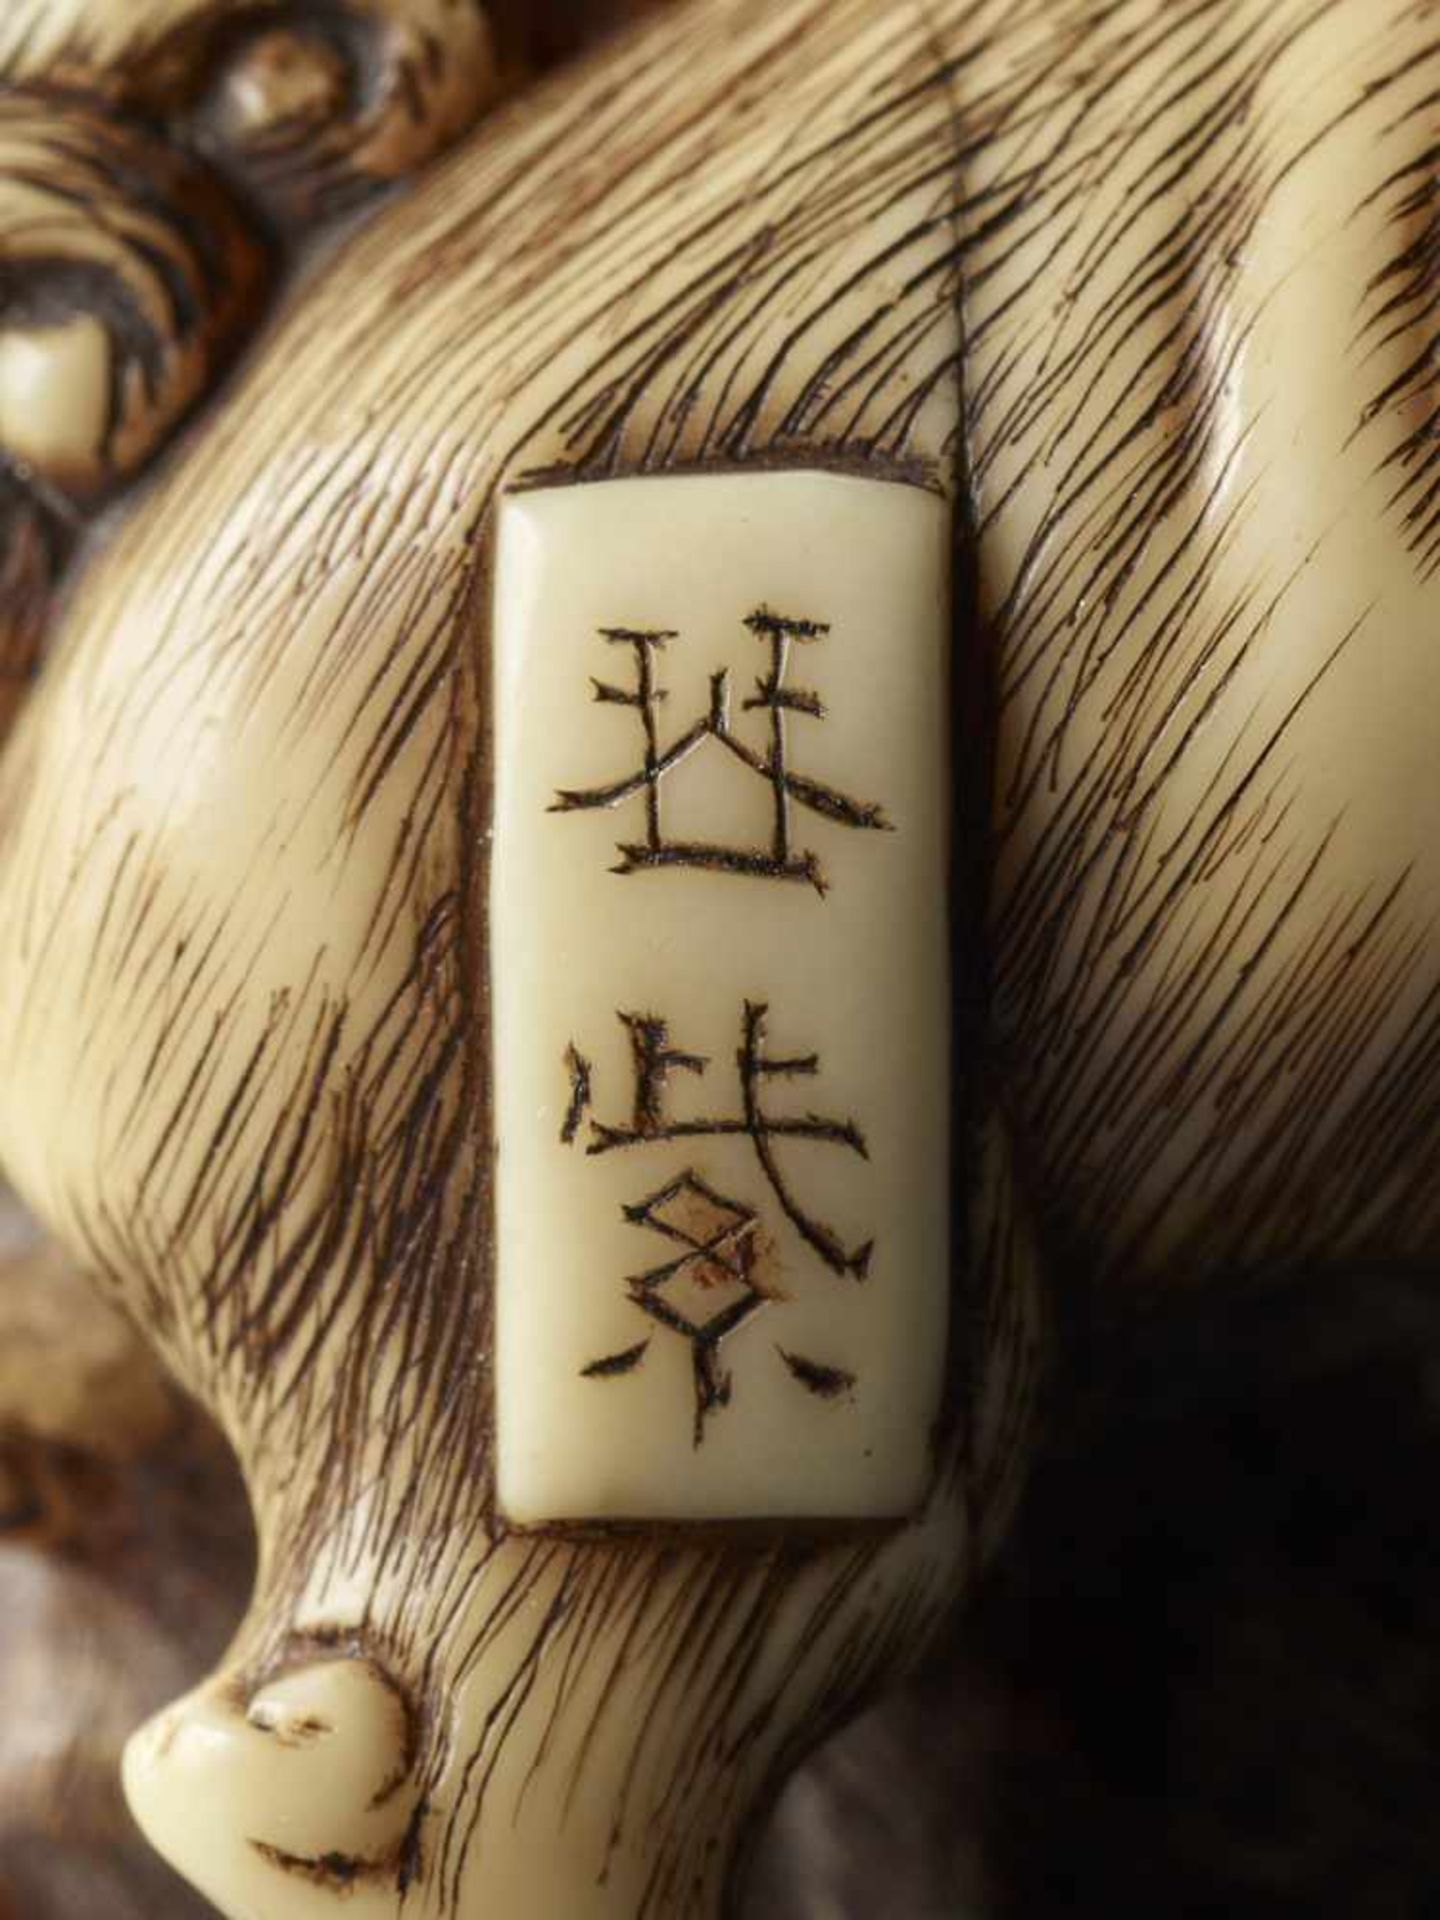 A FINE IVORY NETSUKE OF TWO FIGHTING SHISHI BY KINSHI By Kinshi, ivory netsukeJapan, 19th century, - Image 10 of 10